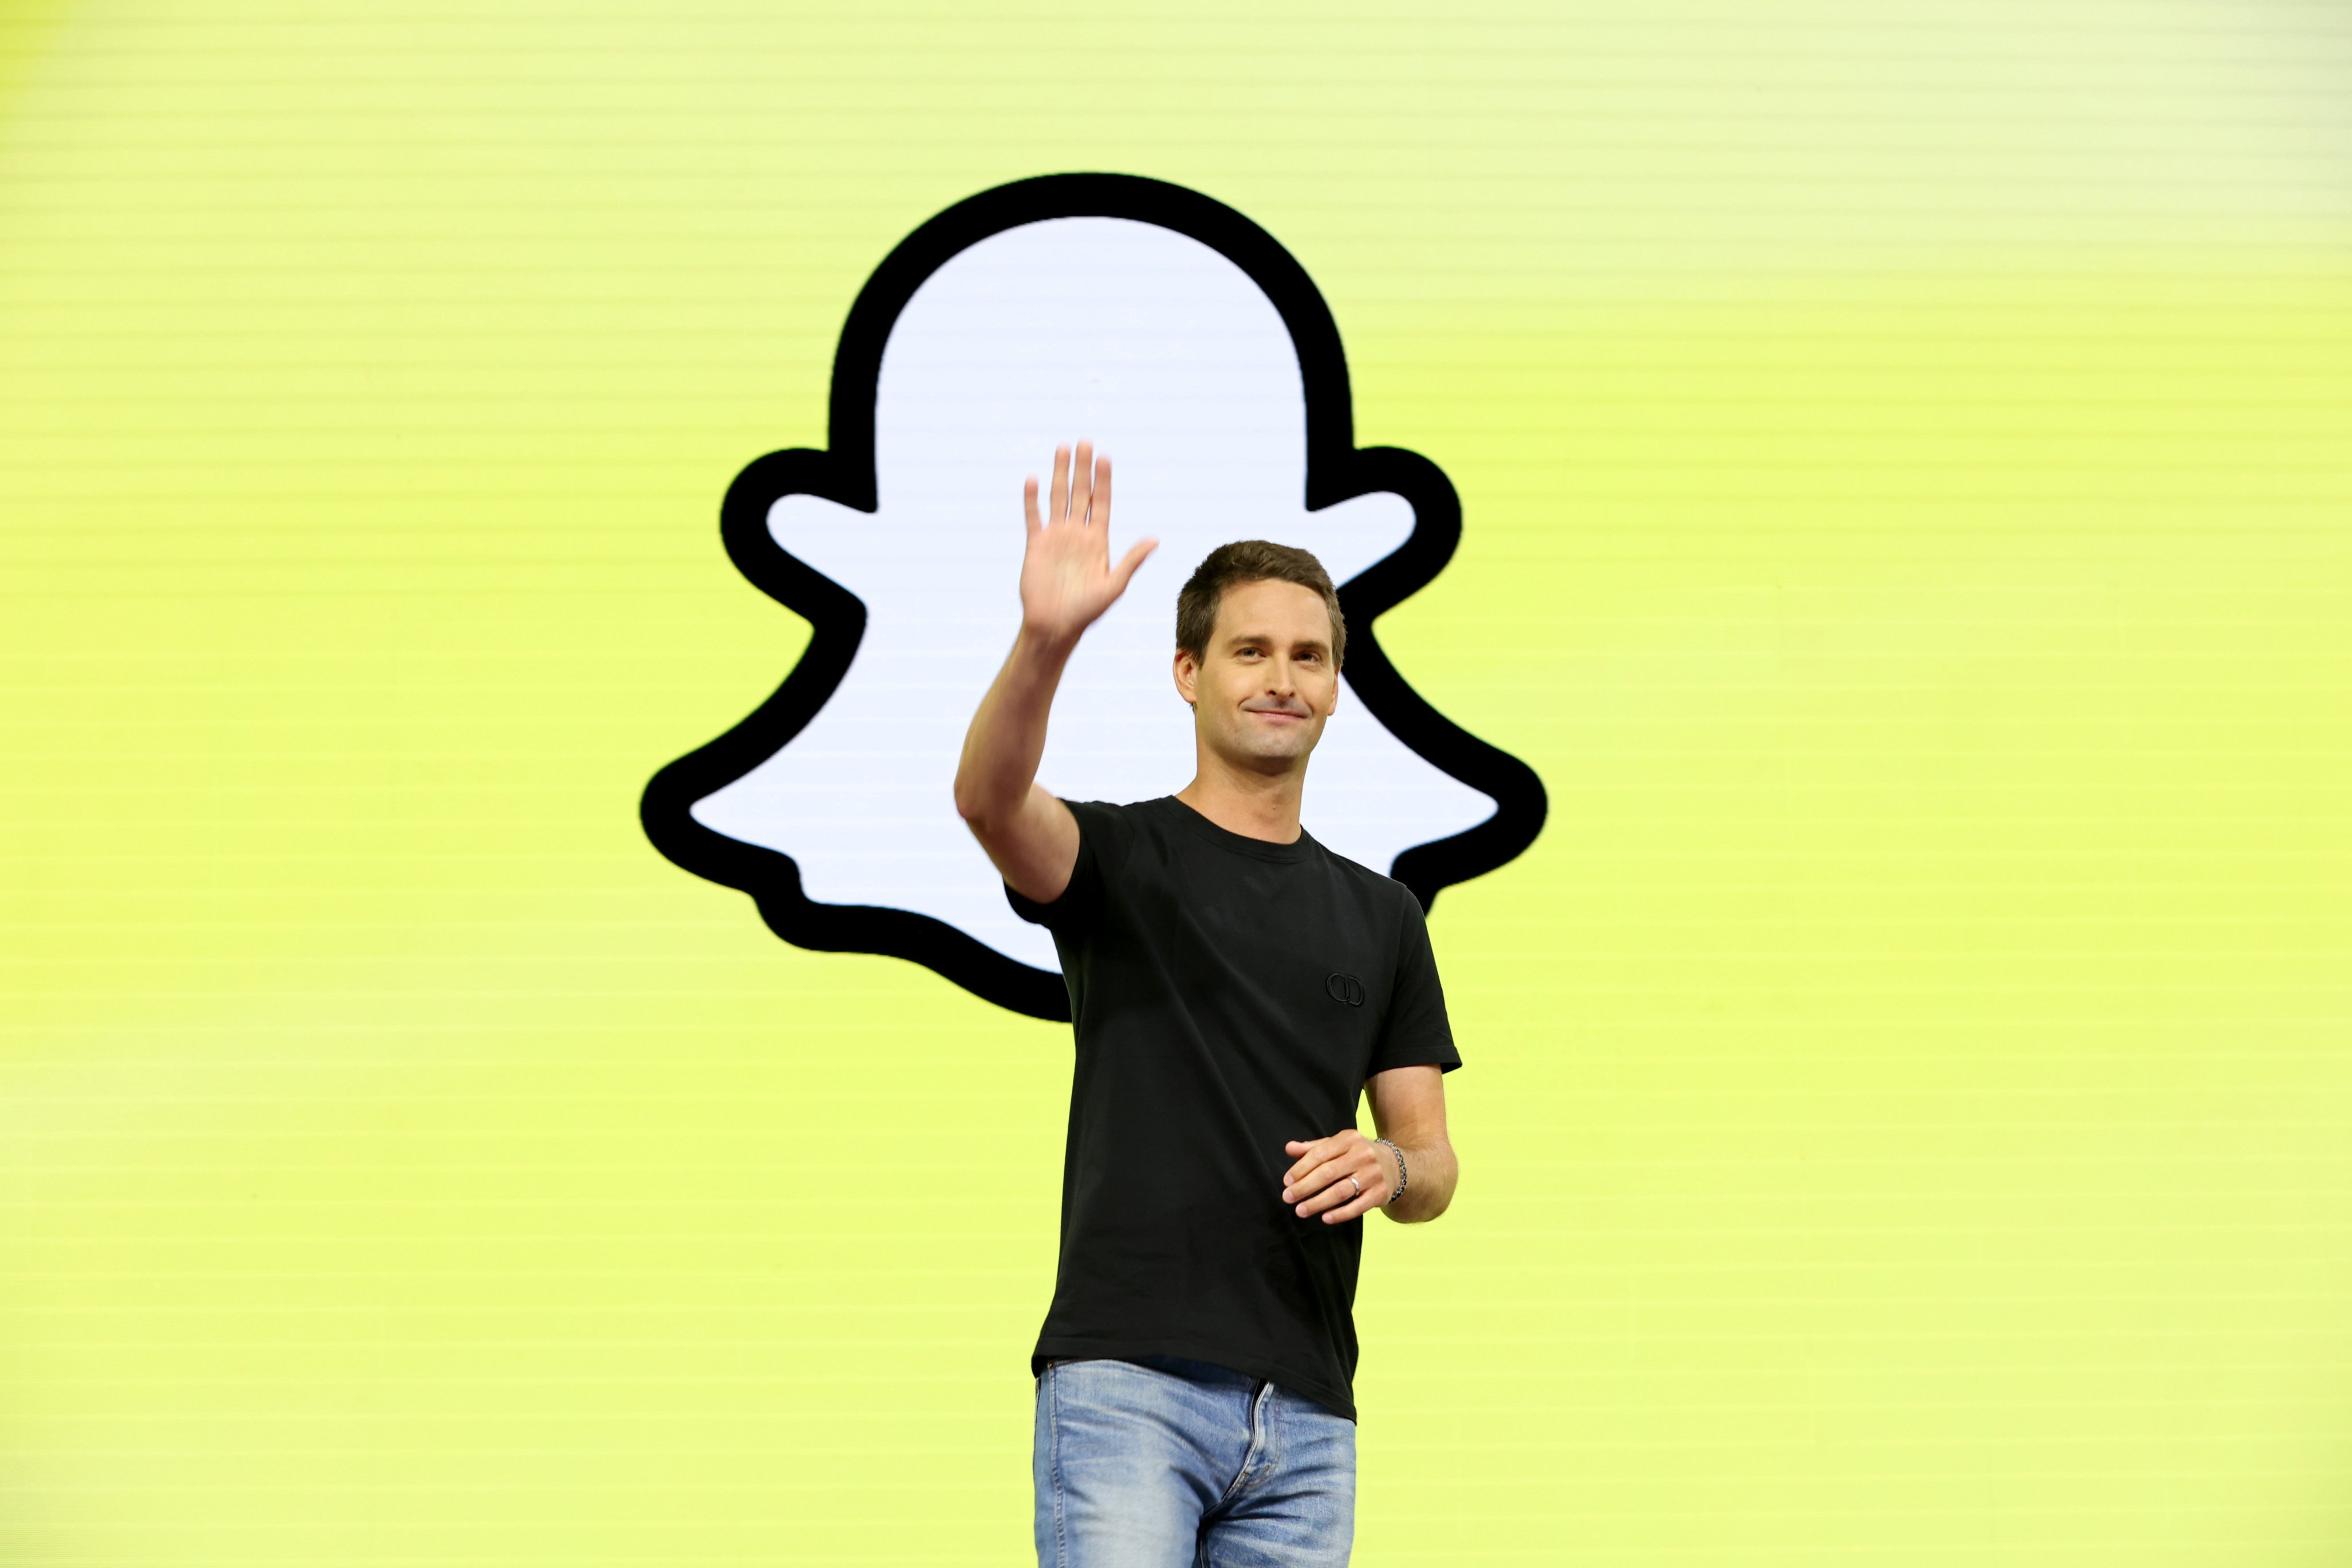 Snapchat CEO Evan Spiegel was once one of the youngest billionaires in the world. Photo: Getty Images